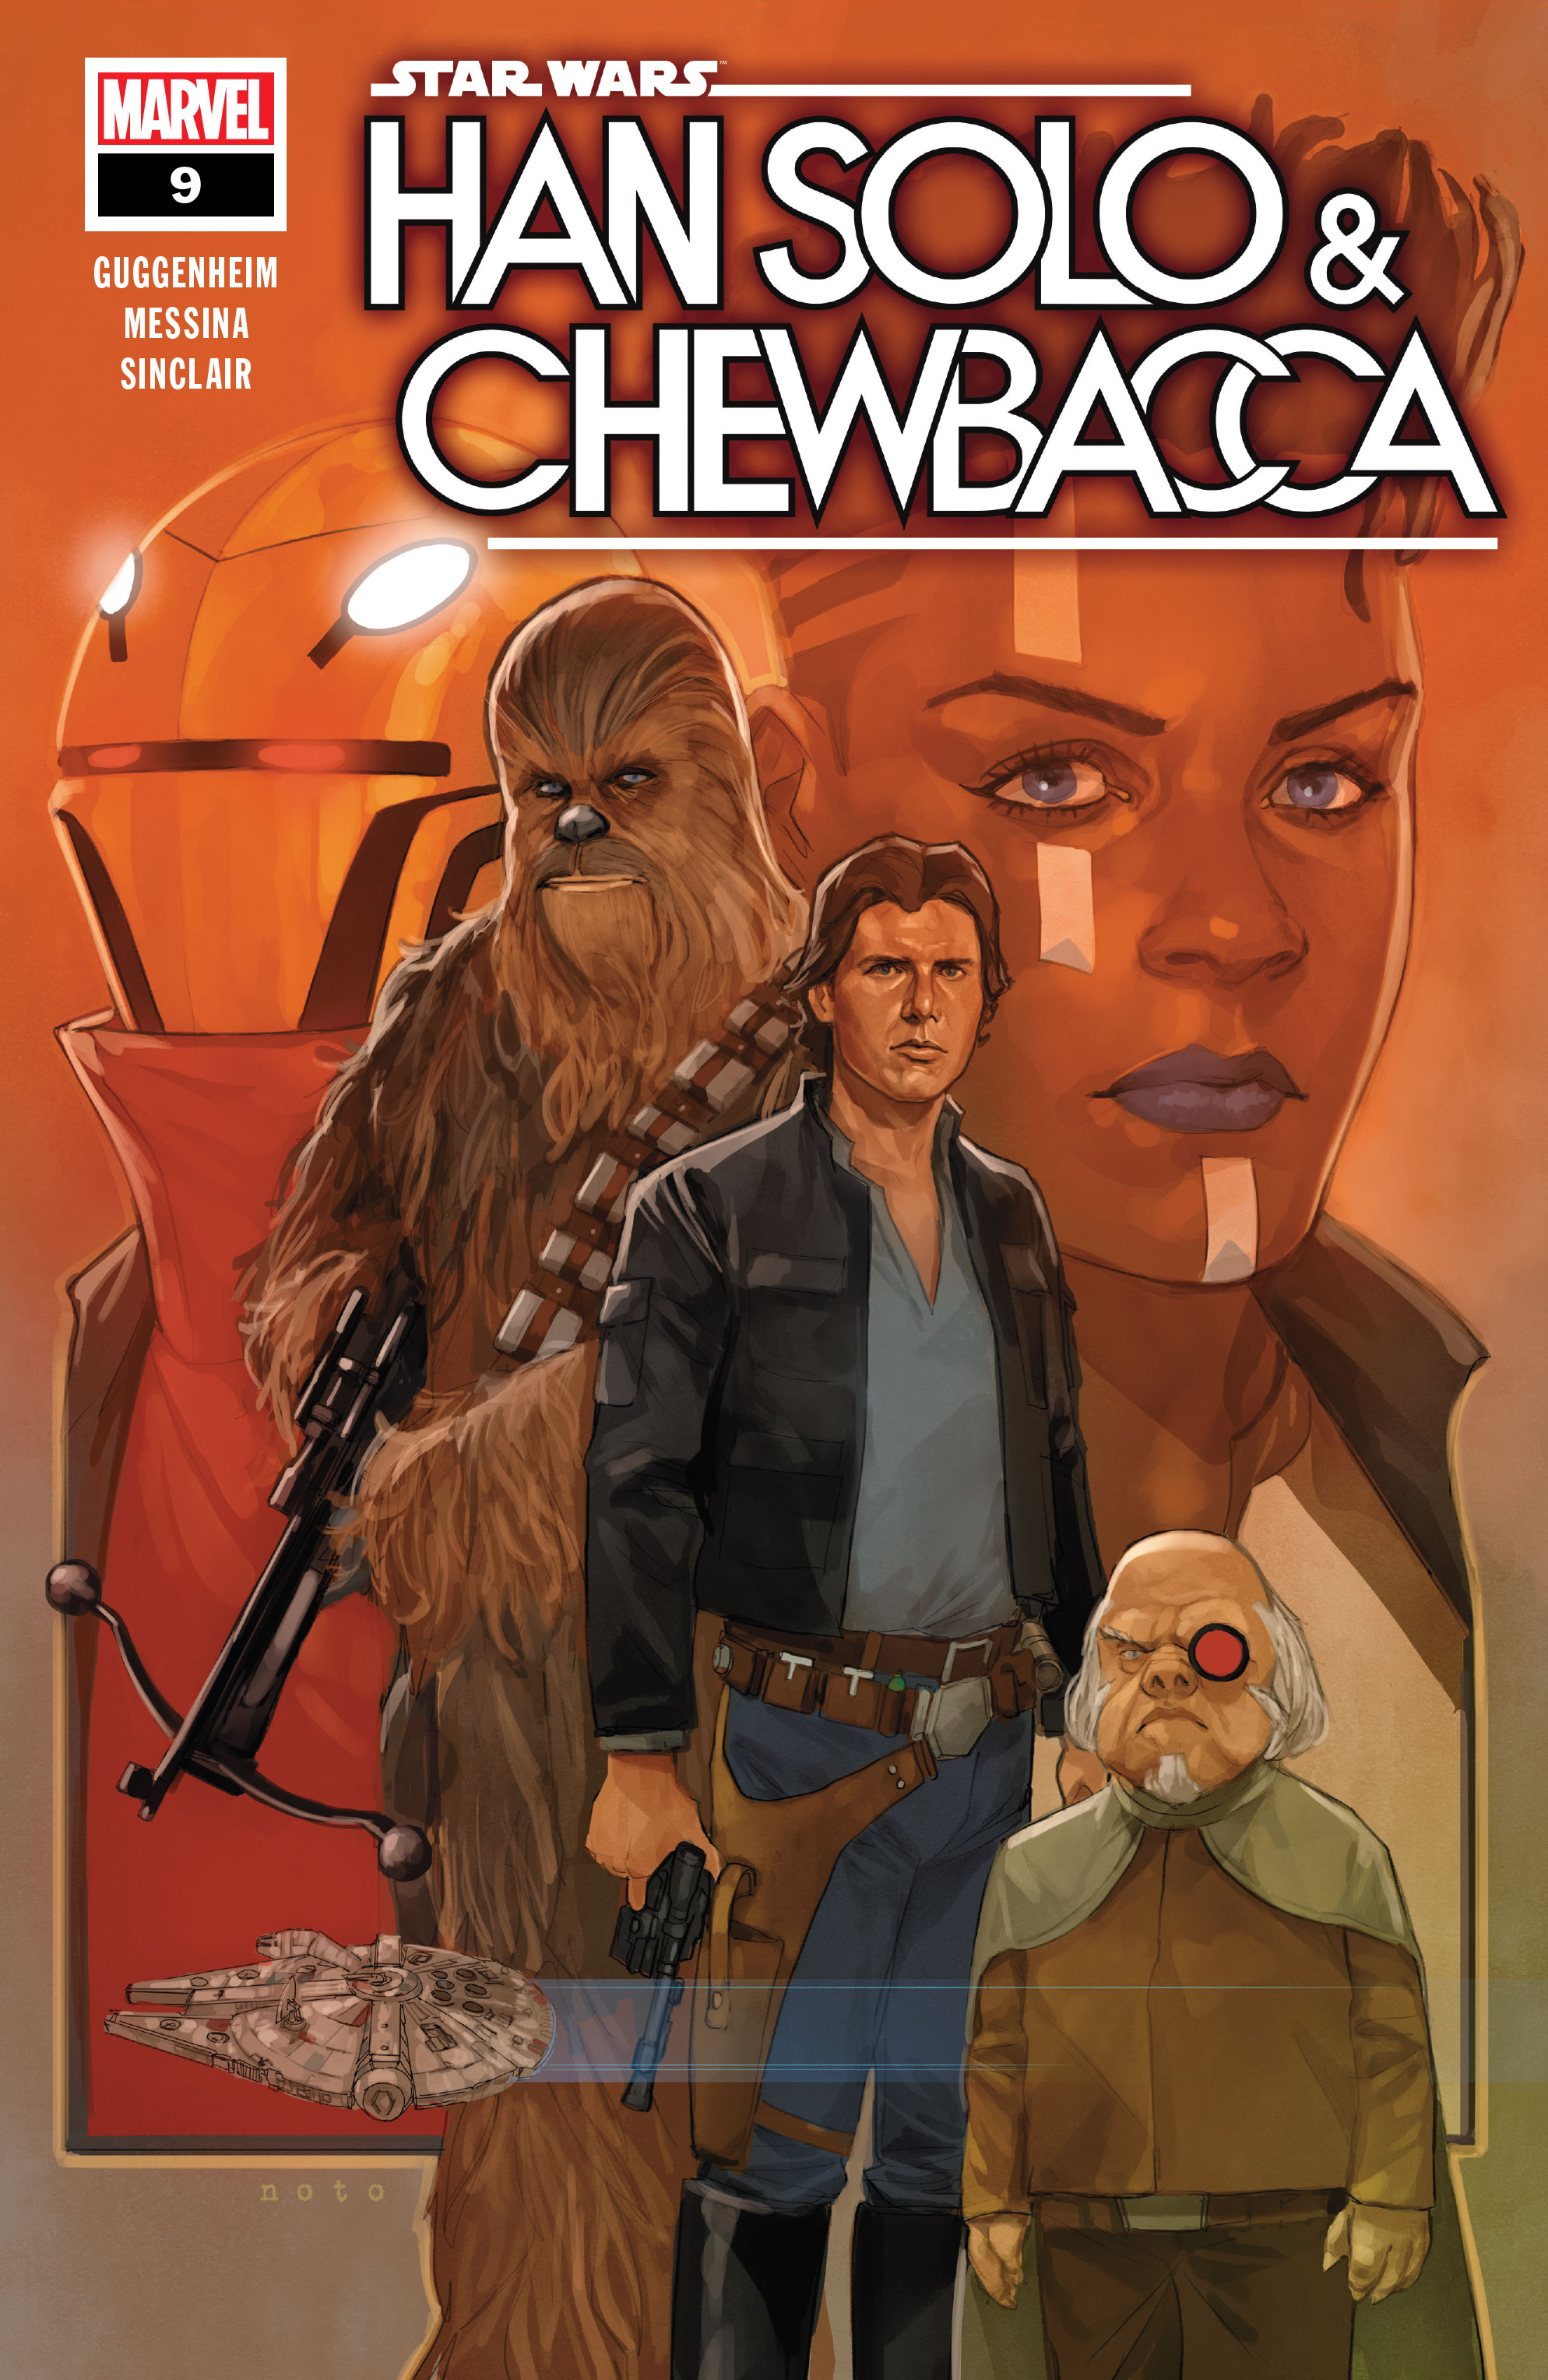 Read online Star Wars: Han Solo & Chewbacca comic -  Issue #9 - 1